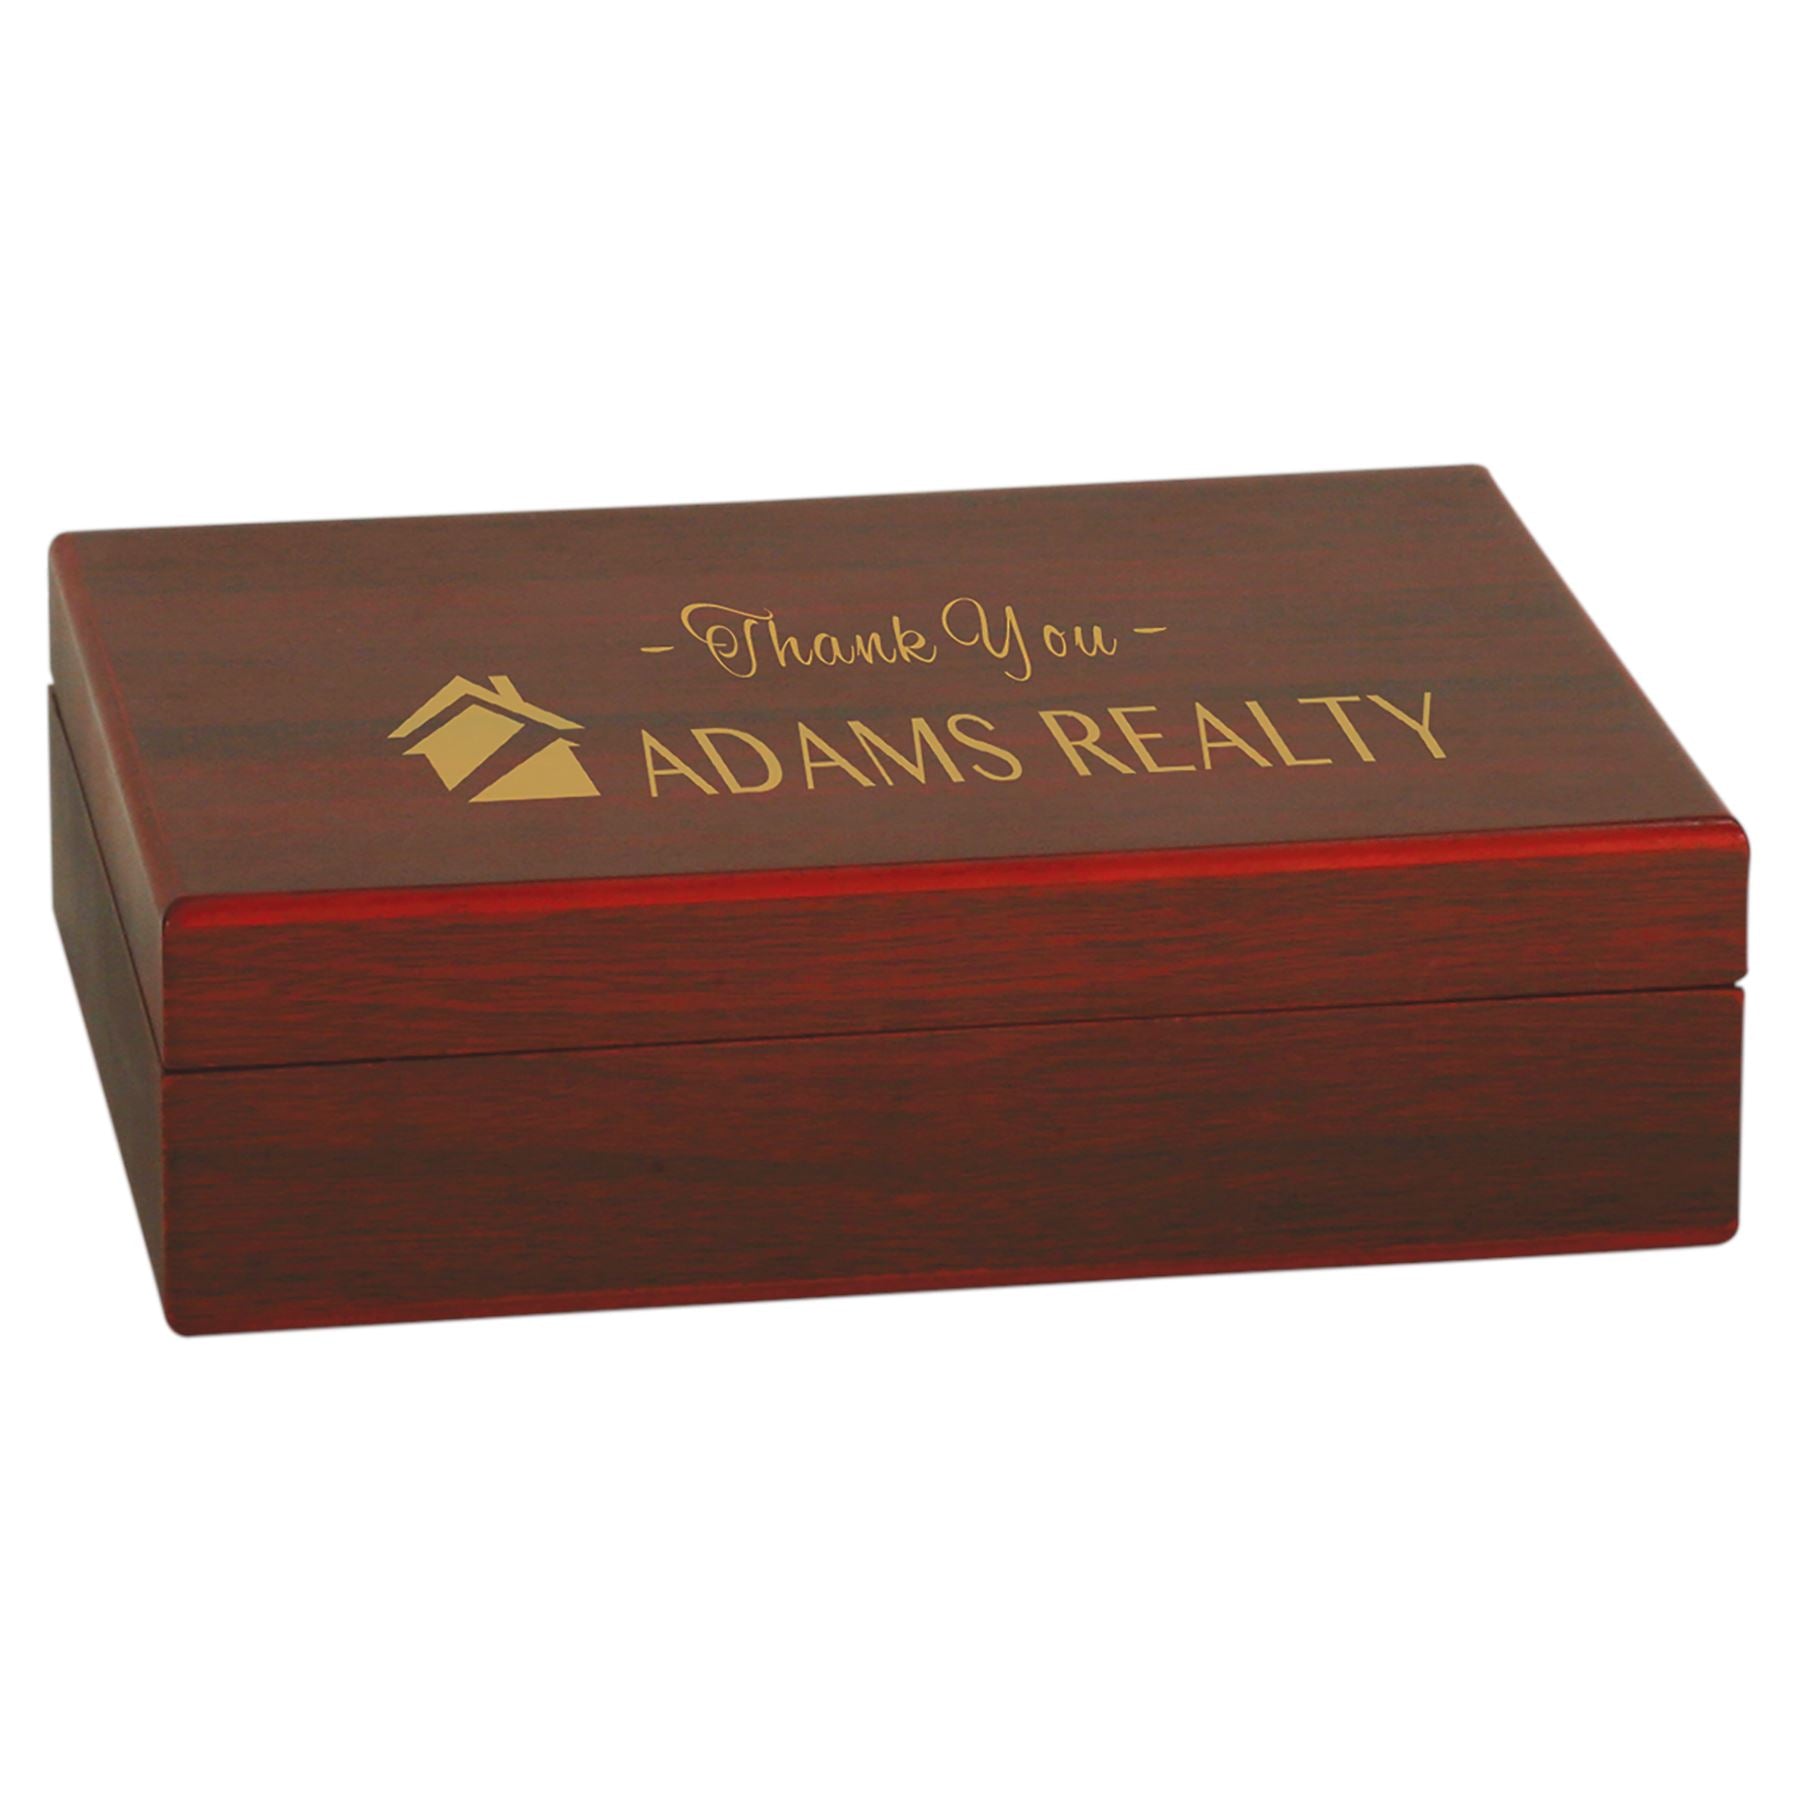 Golf Ball Box, Rosewood Finish Golf Gifts Craftworks NW 